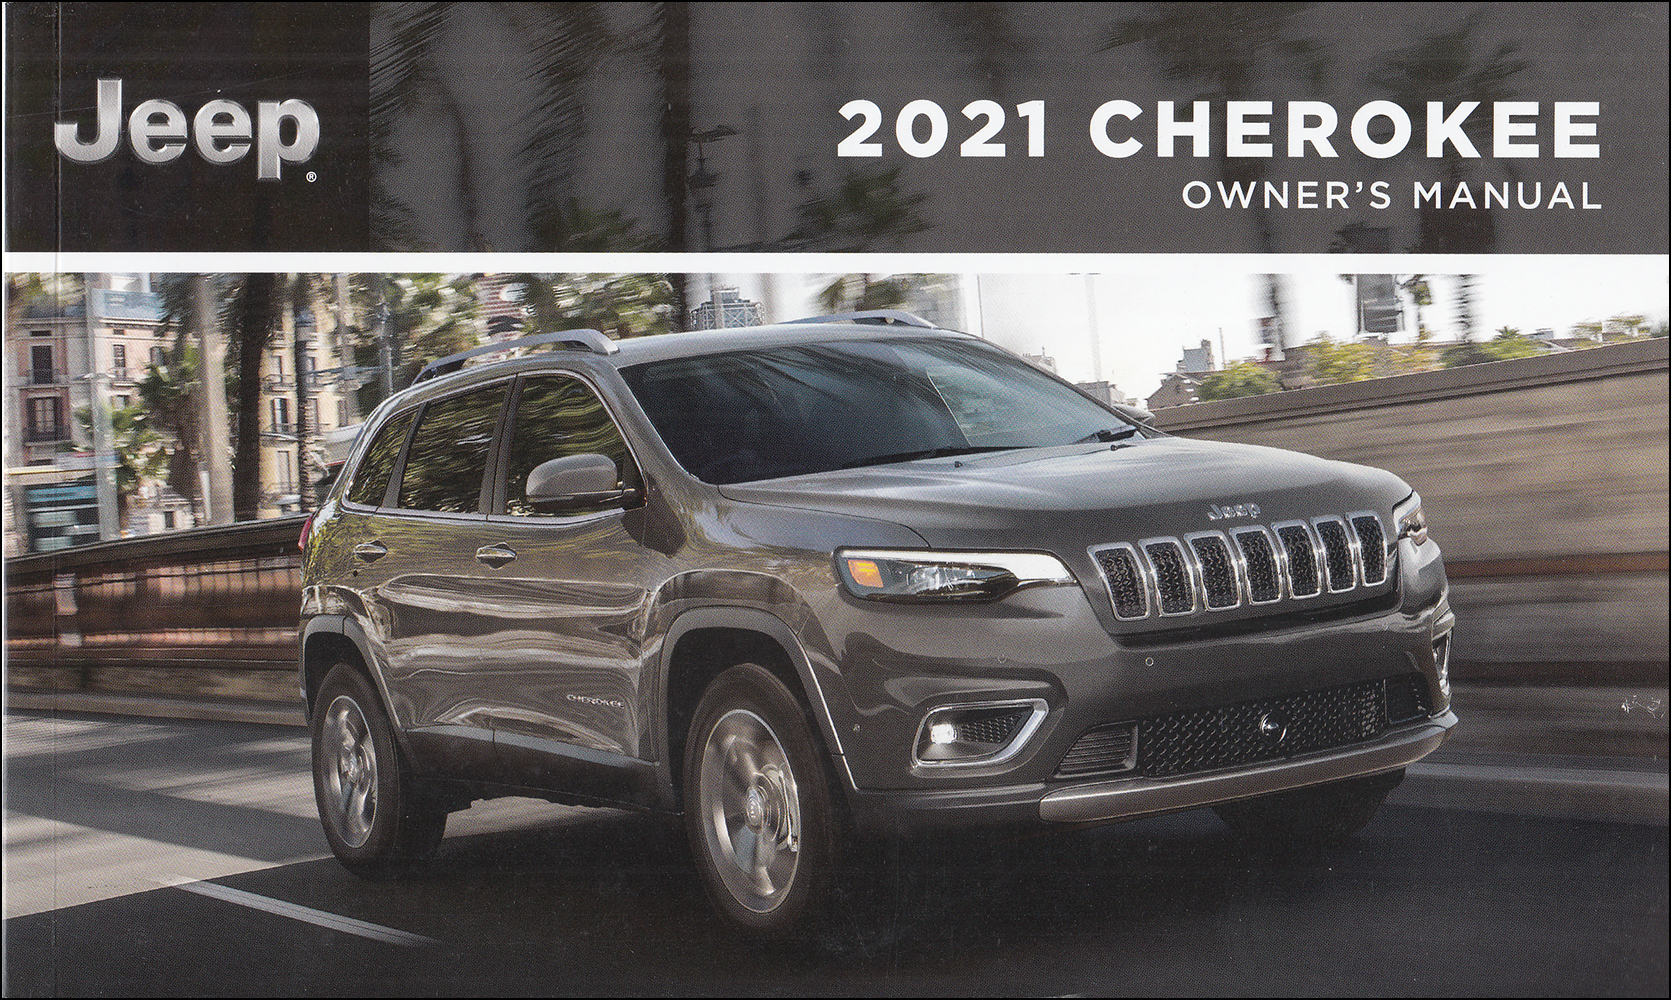 2021 Jeep Cherokee Owner's Manual Original - Extended 437-page version